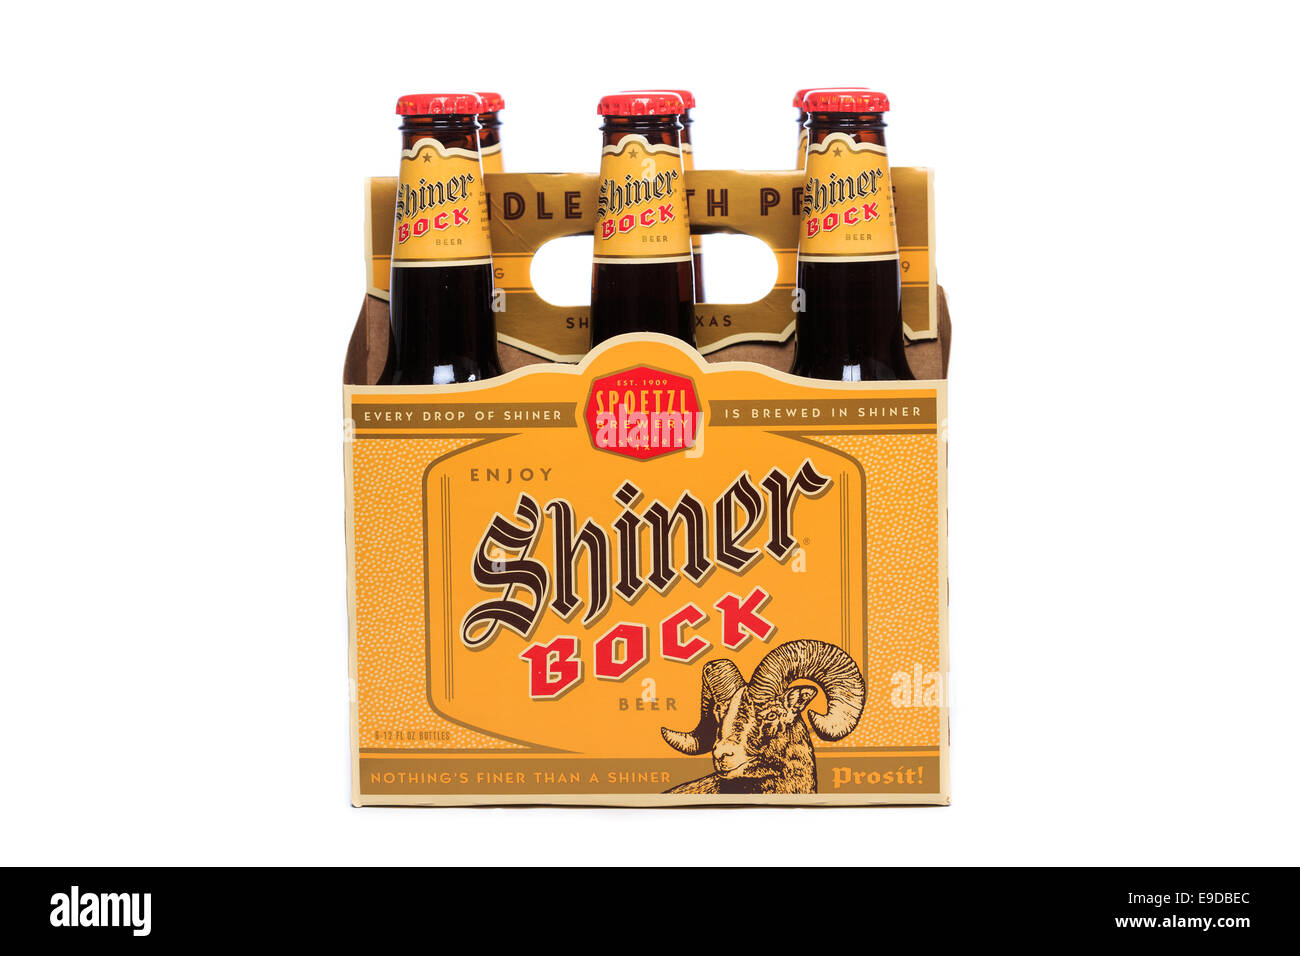 Shiner Bock Beer from the Texas Spotzl Brewery Stock Photo